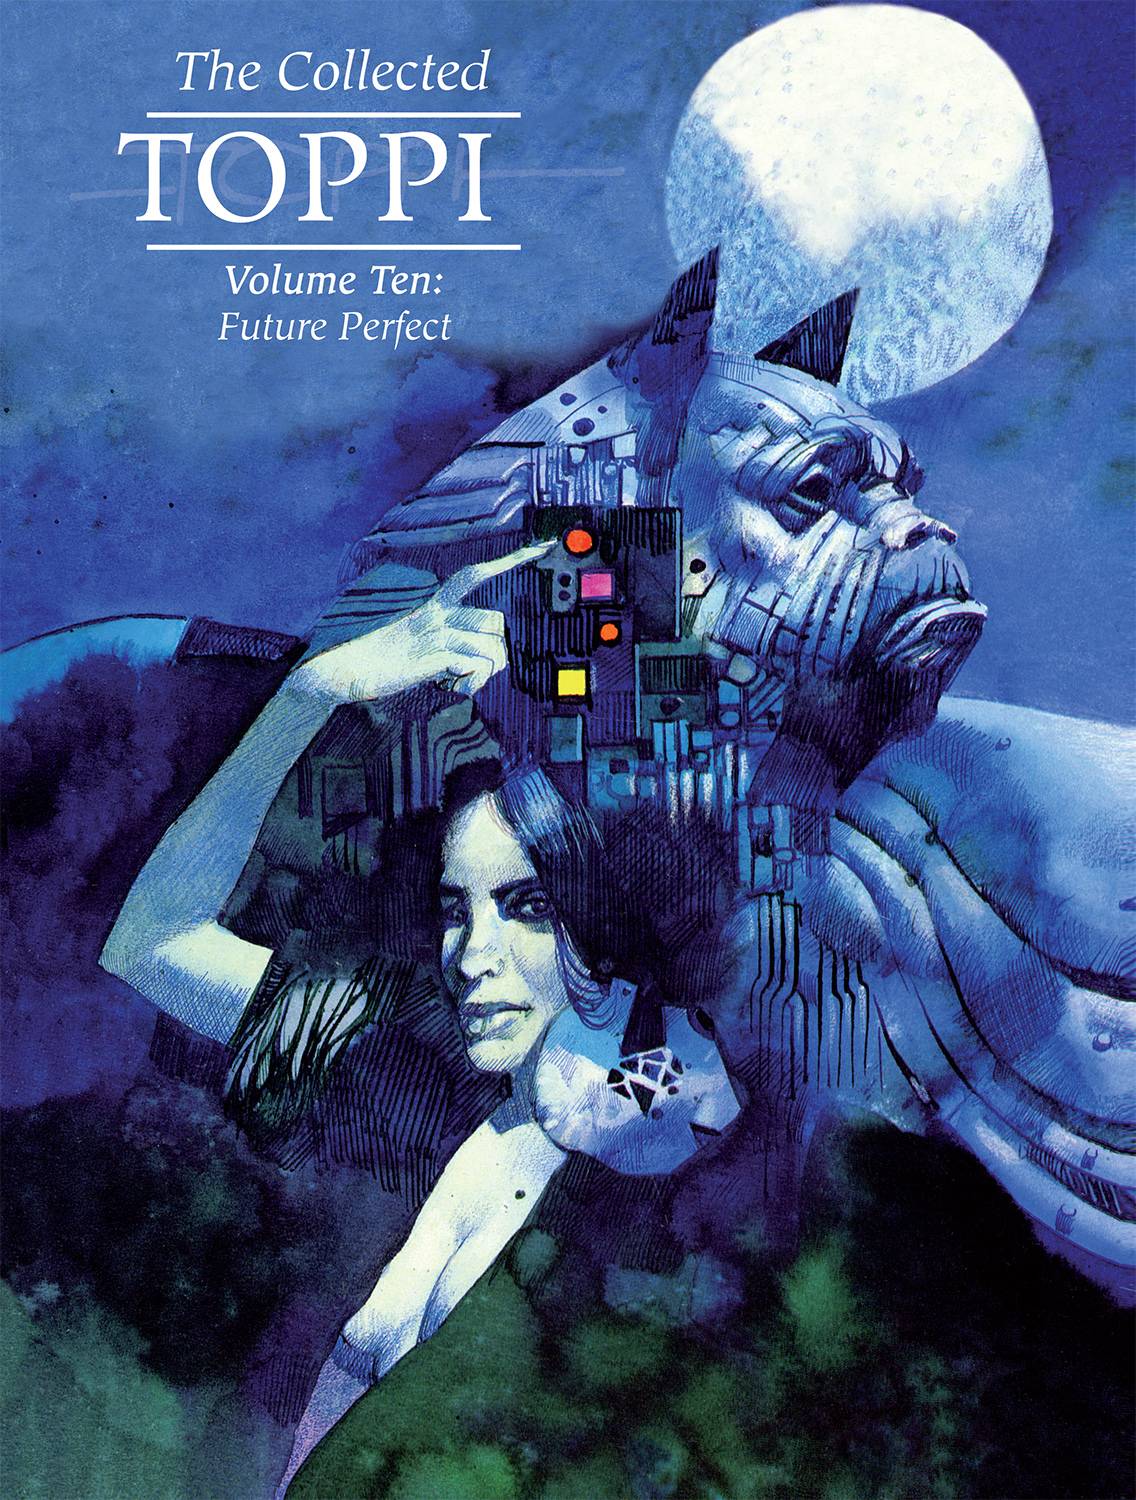 The Collected Toppi vol 10: Future Perfect h/c